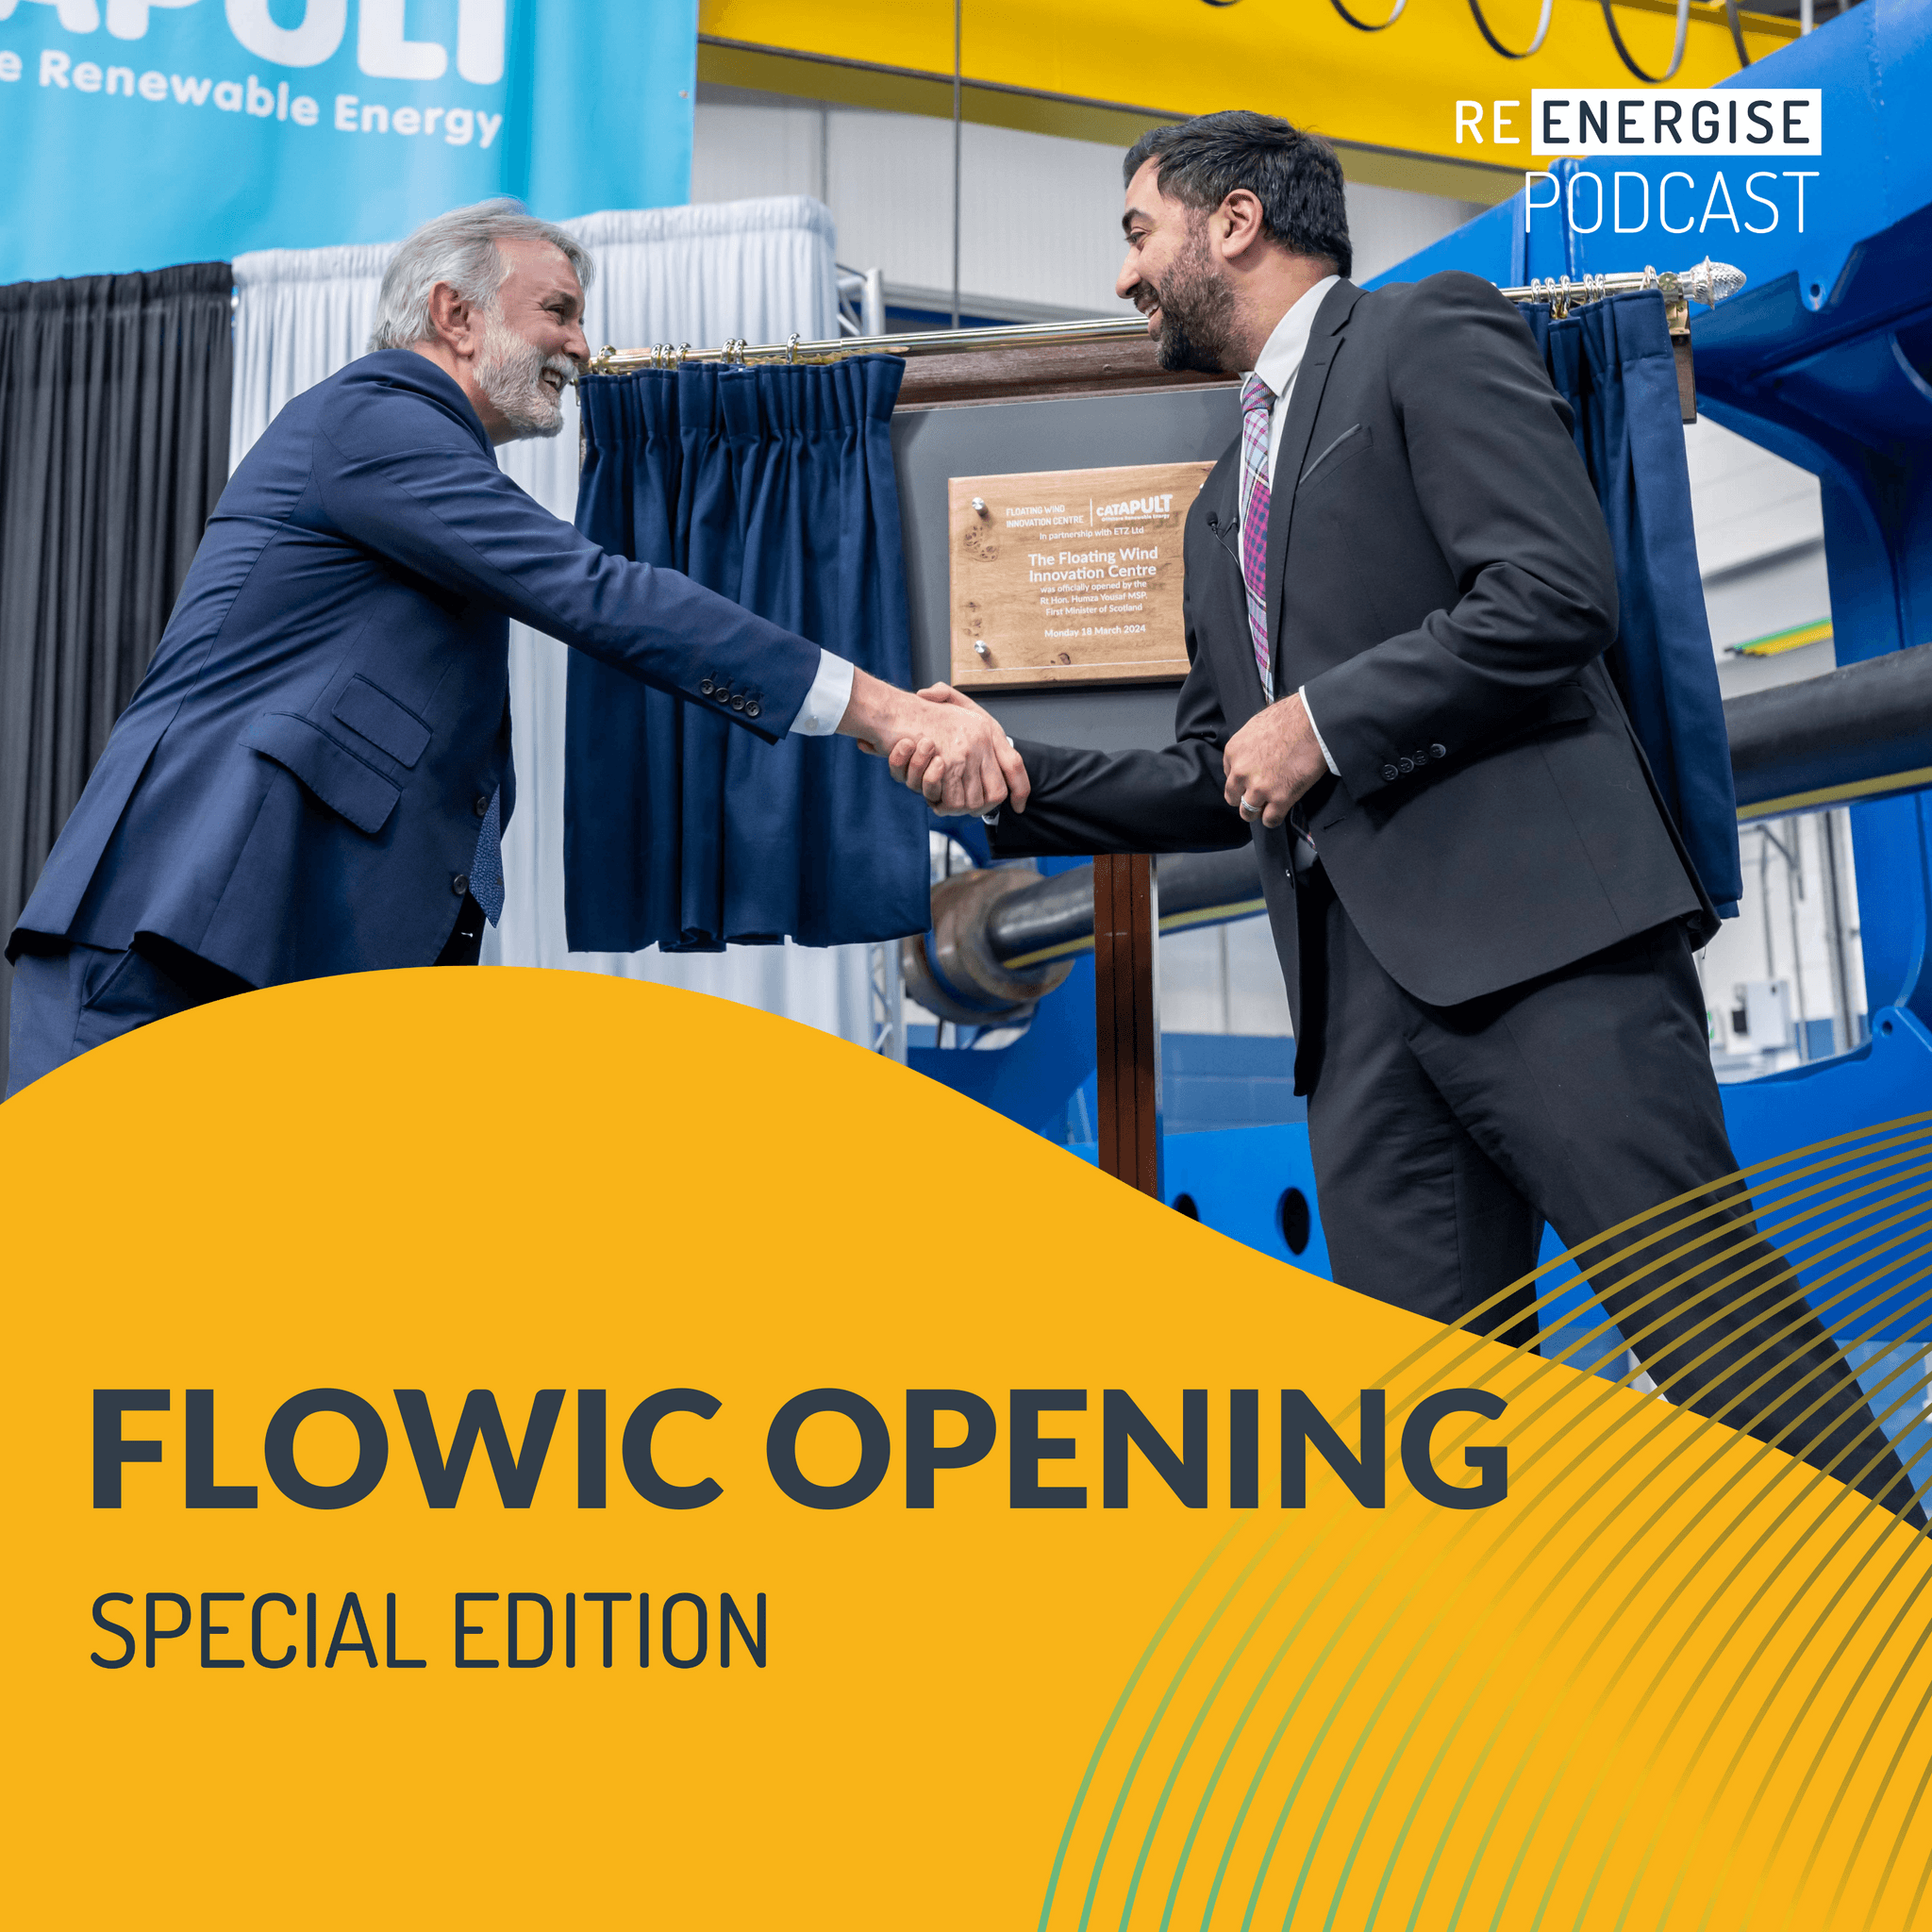 Event Special: FLOWIC opening with&#8230; technology demonstrators